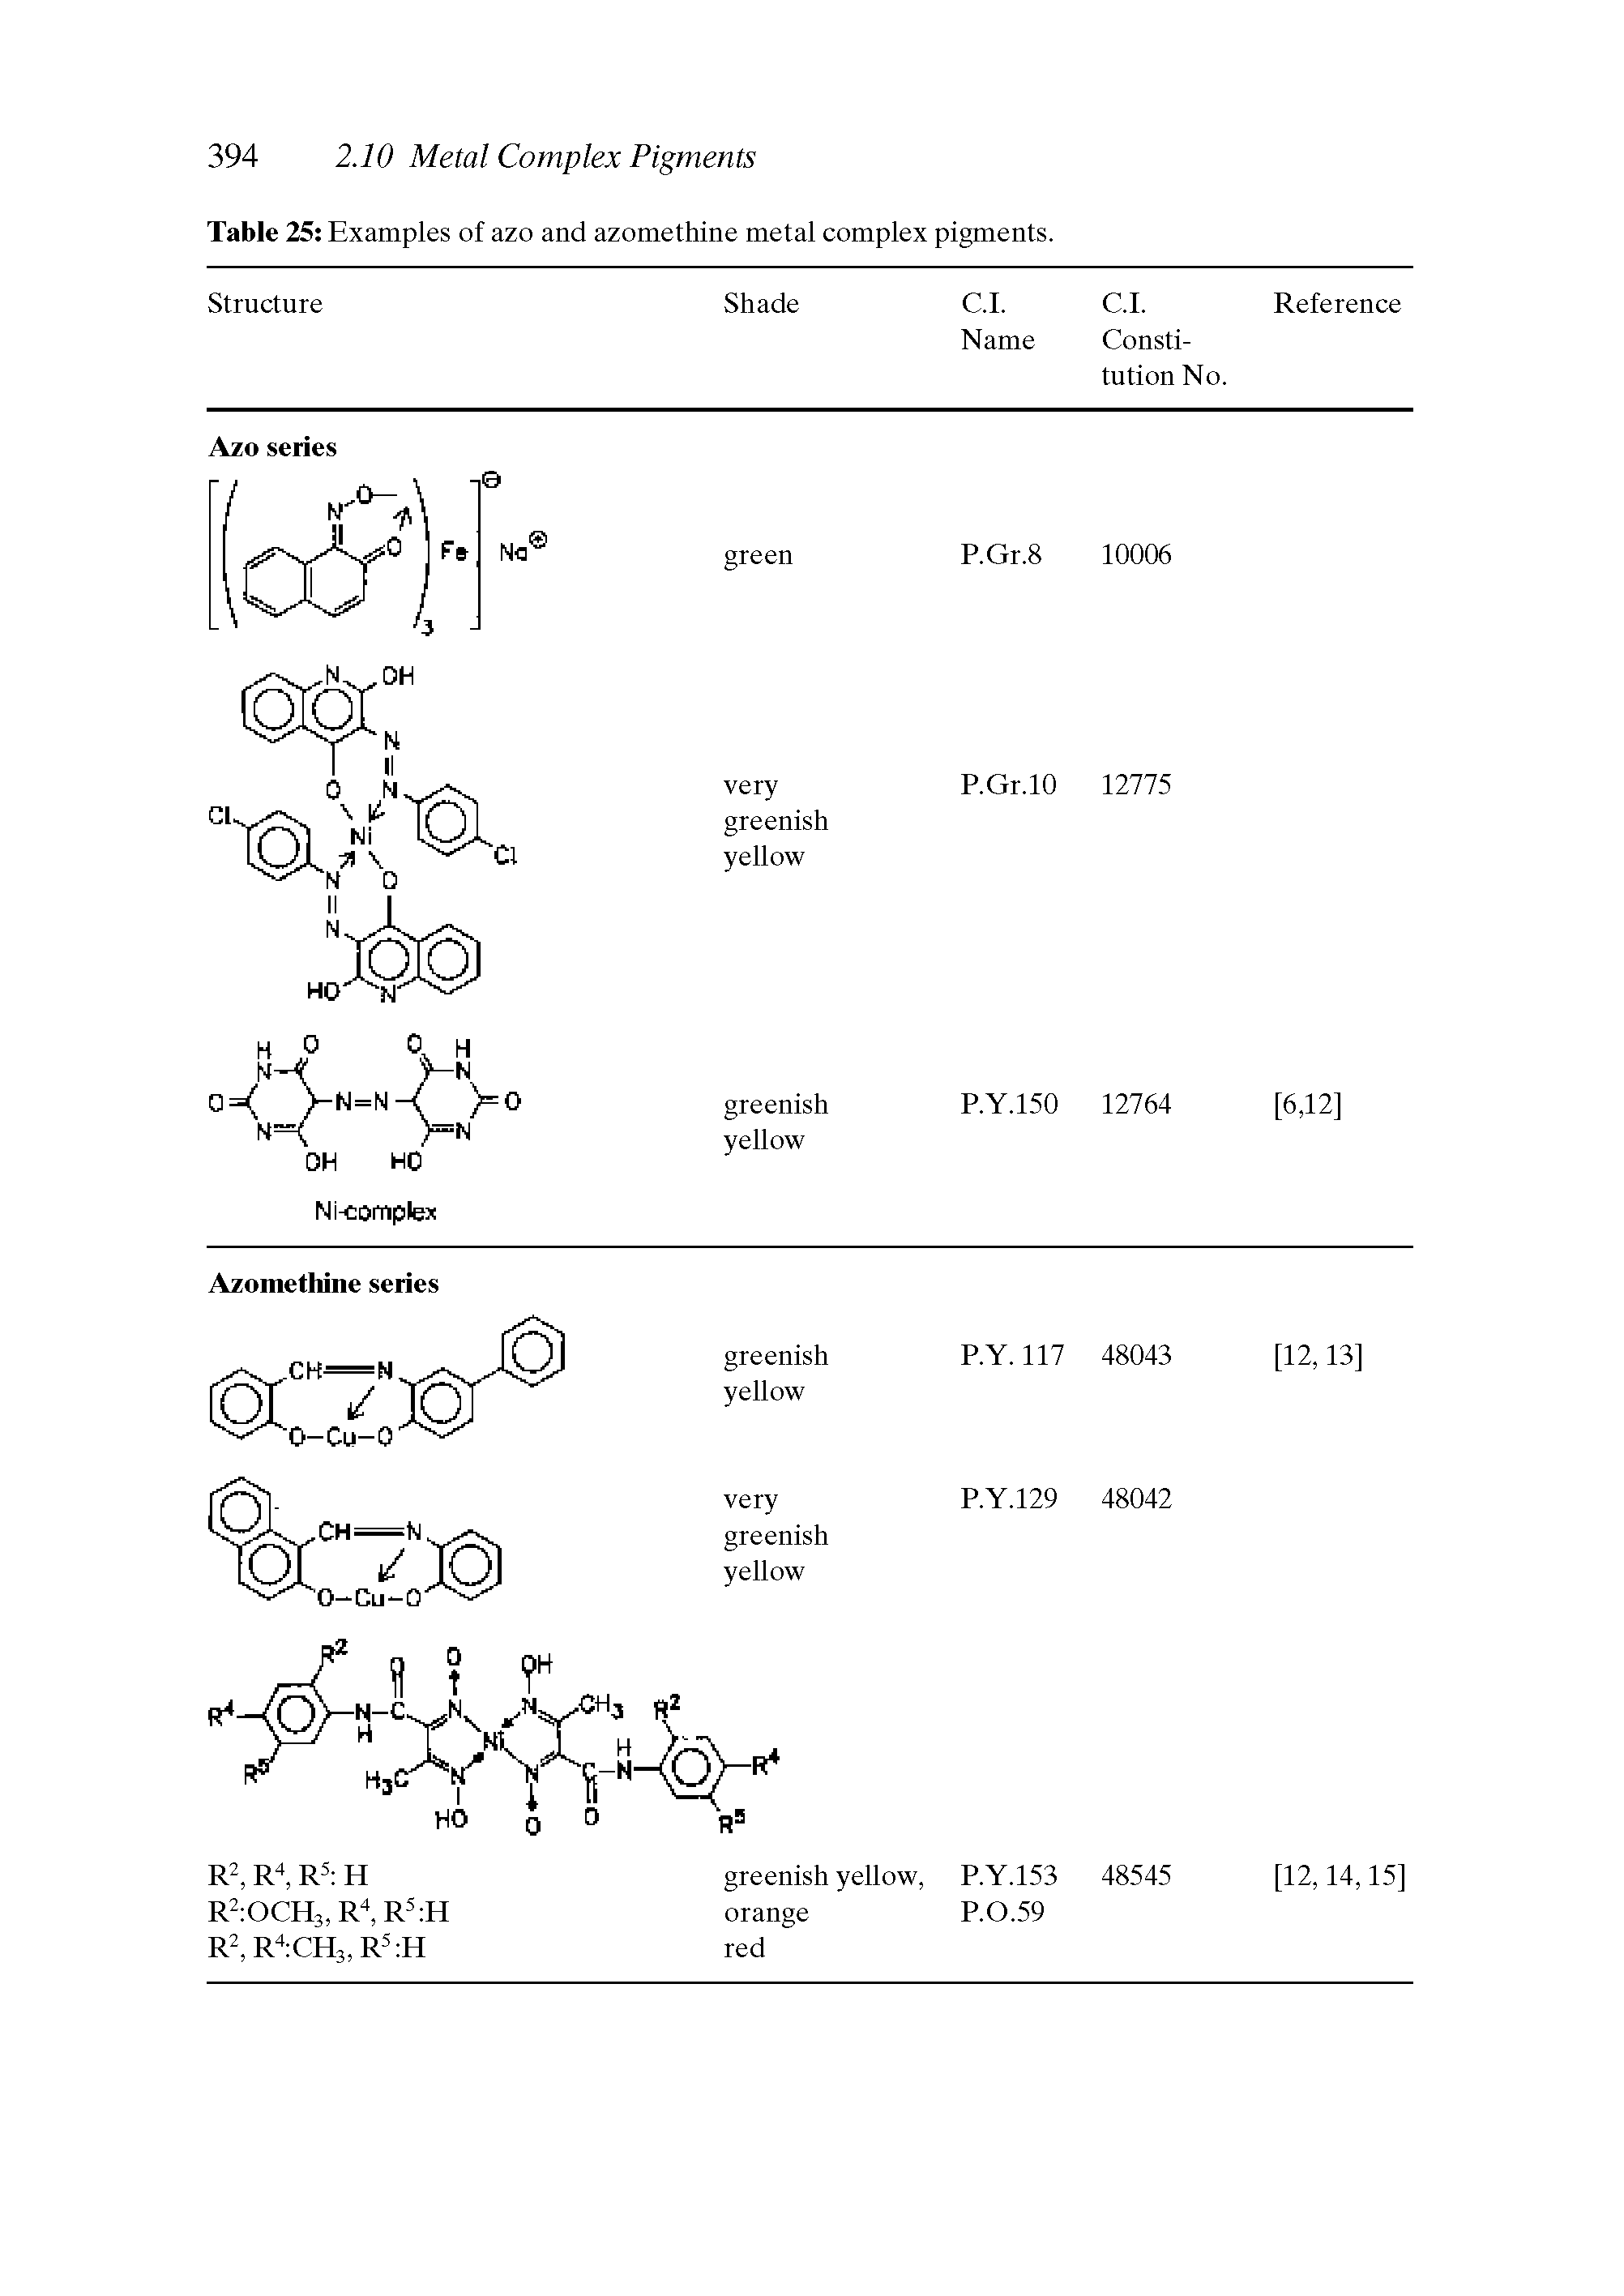 Table 25 Examples of azo and azomethine metal complex pigments.